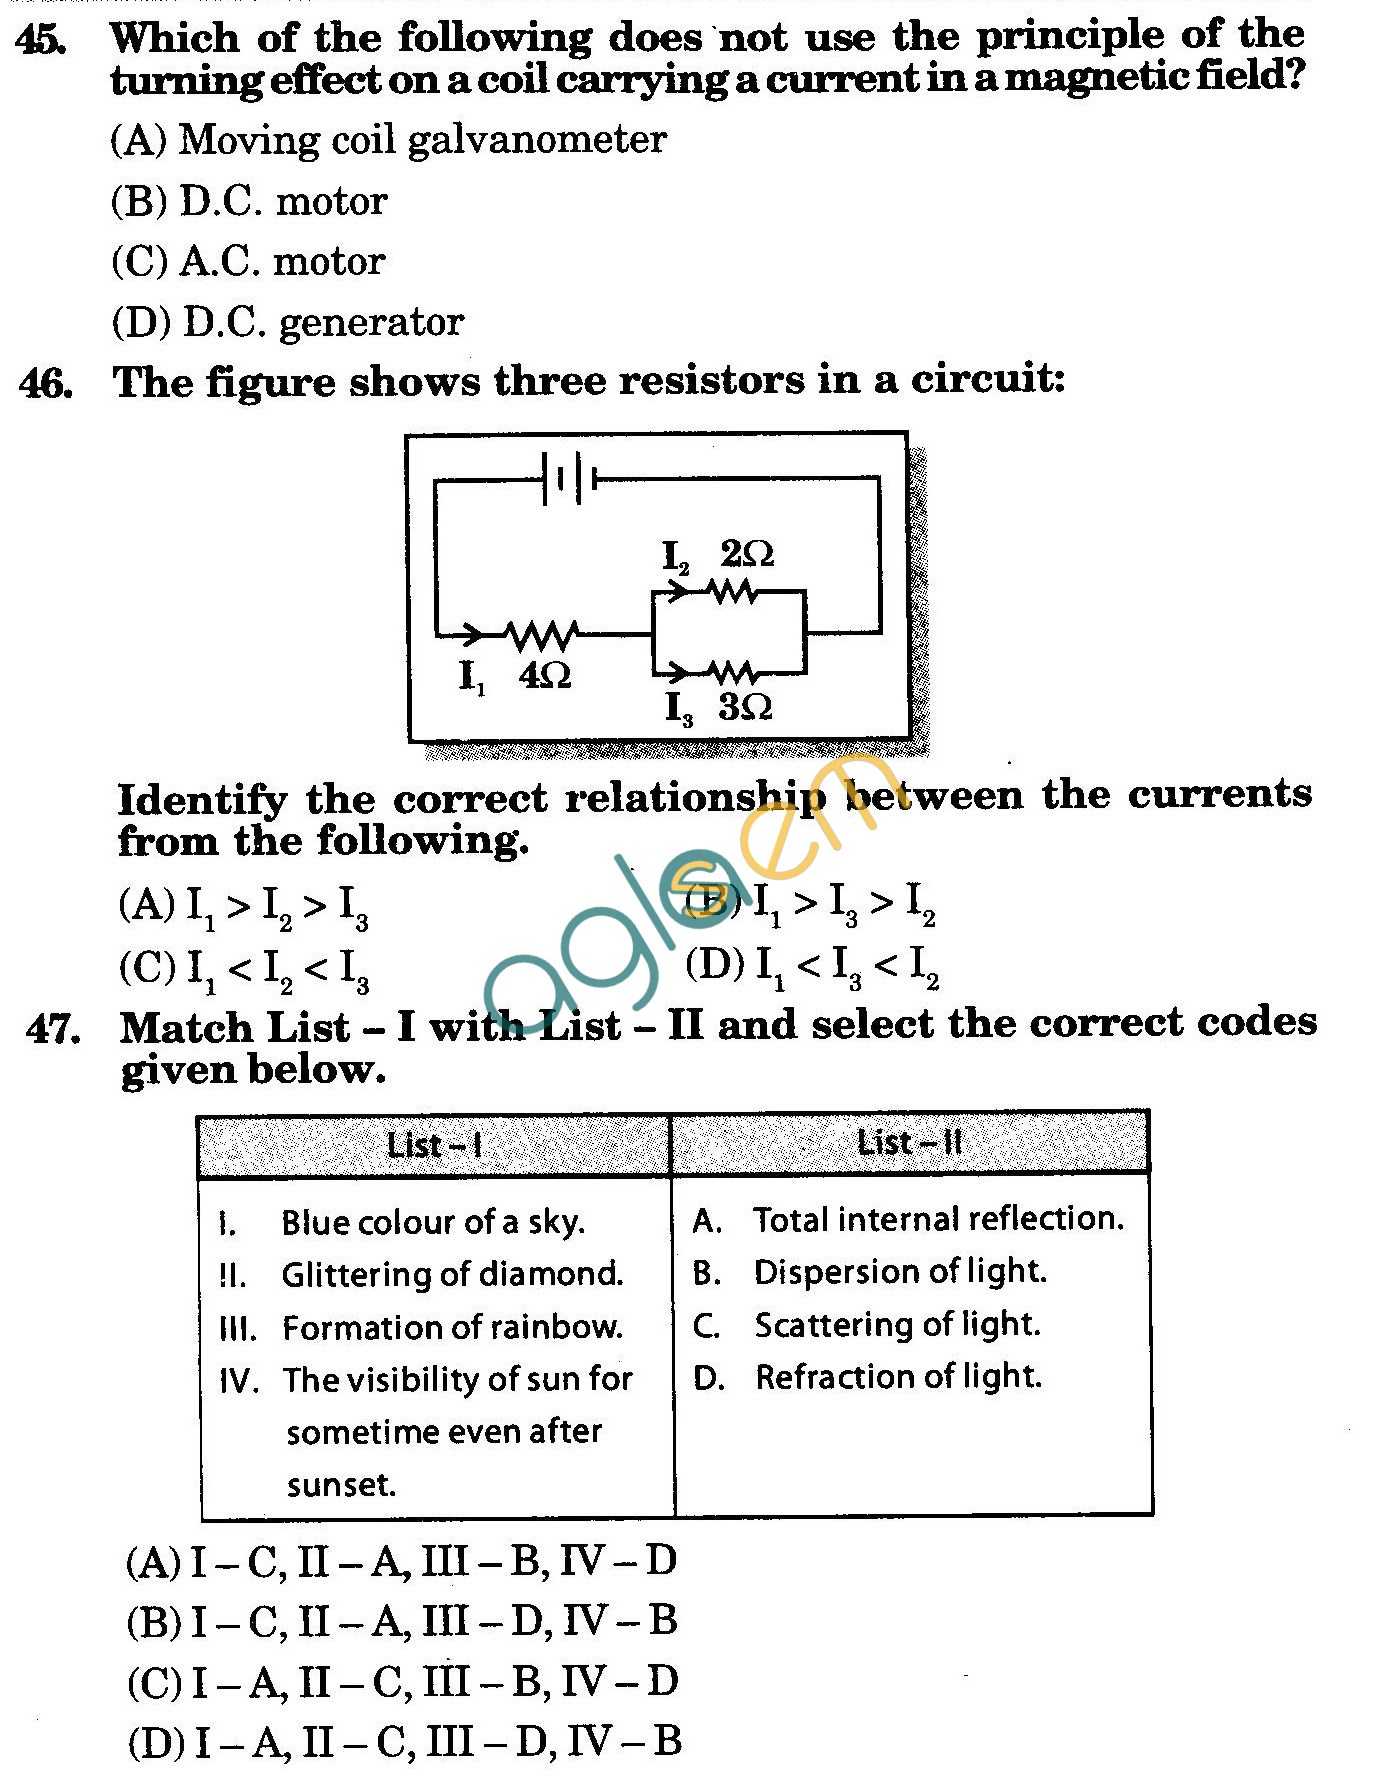 NSTSE 2010: Class X Question Paper with Answers - Physics